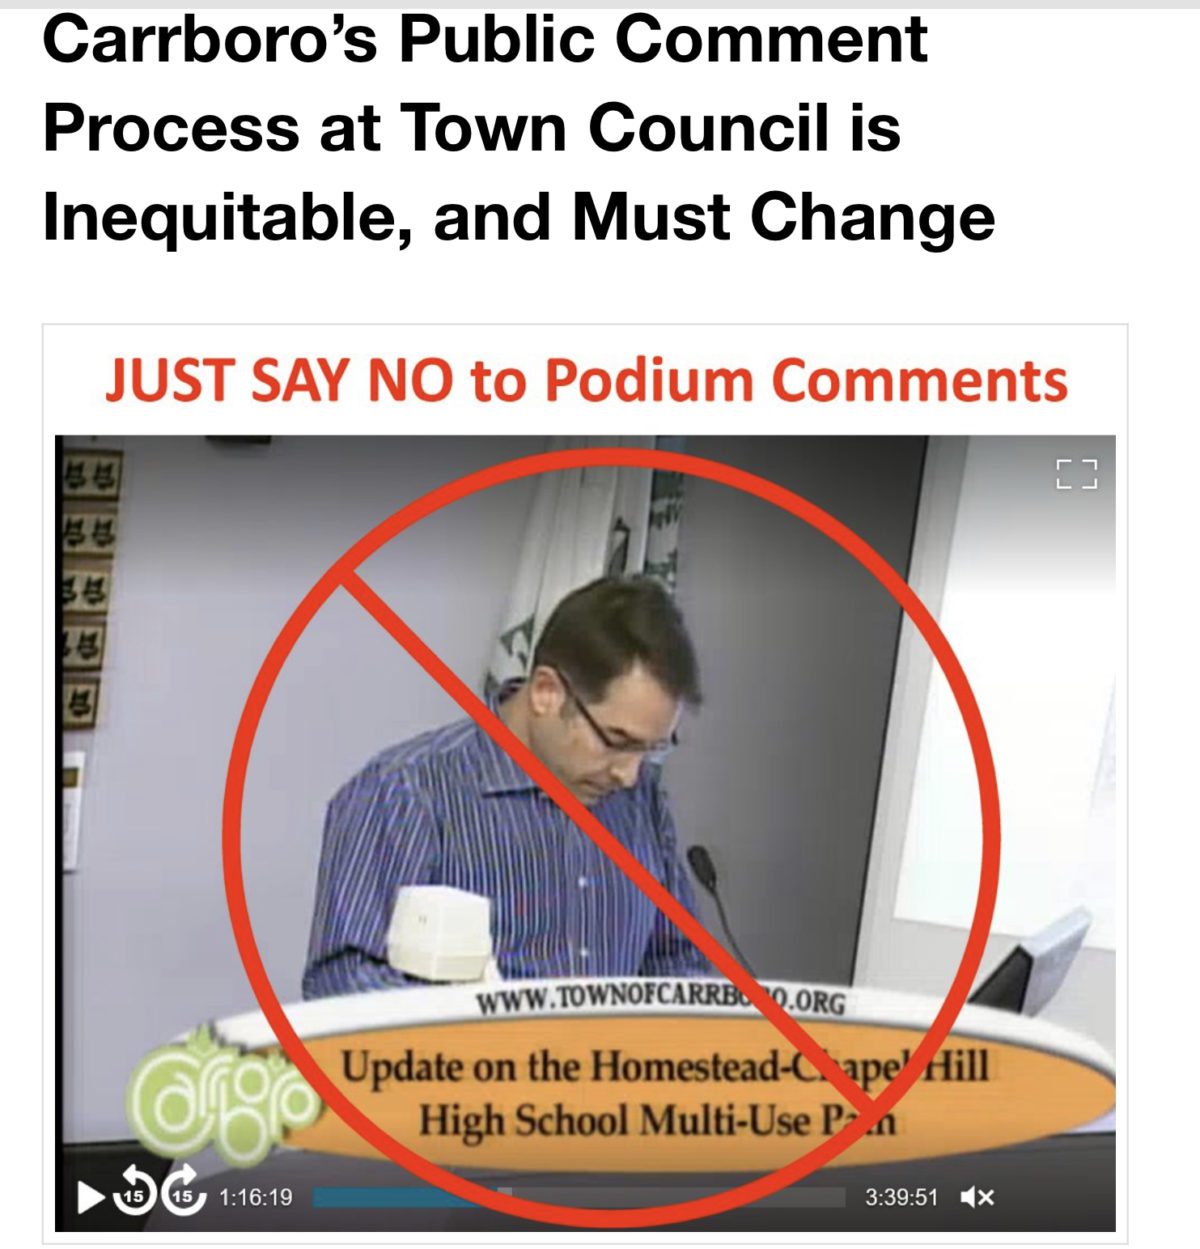 Screenshot of headline and cover image of blog post at https://citybeautiful21.com/2022/12/30/carrboros-public-comment-process-at-town-council-is-inequitable-and-must-change/. The headline states “Carrboro’s Public Comment Process at Town Council is Inequitable, and Must Change.” Beneath that is a screenshot of video of a person providing comment at a Carrboro Town Council meeting with text above in red which states “JUST SAY NO to Podium Comments.”